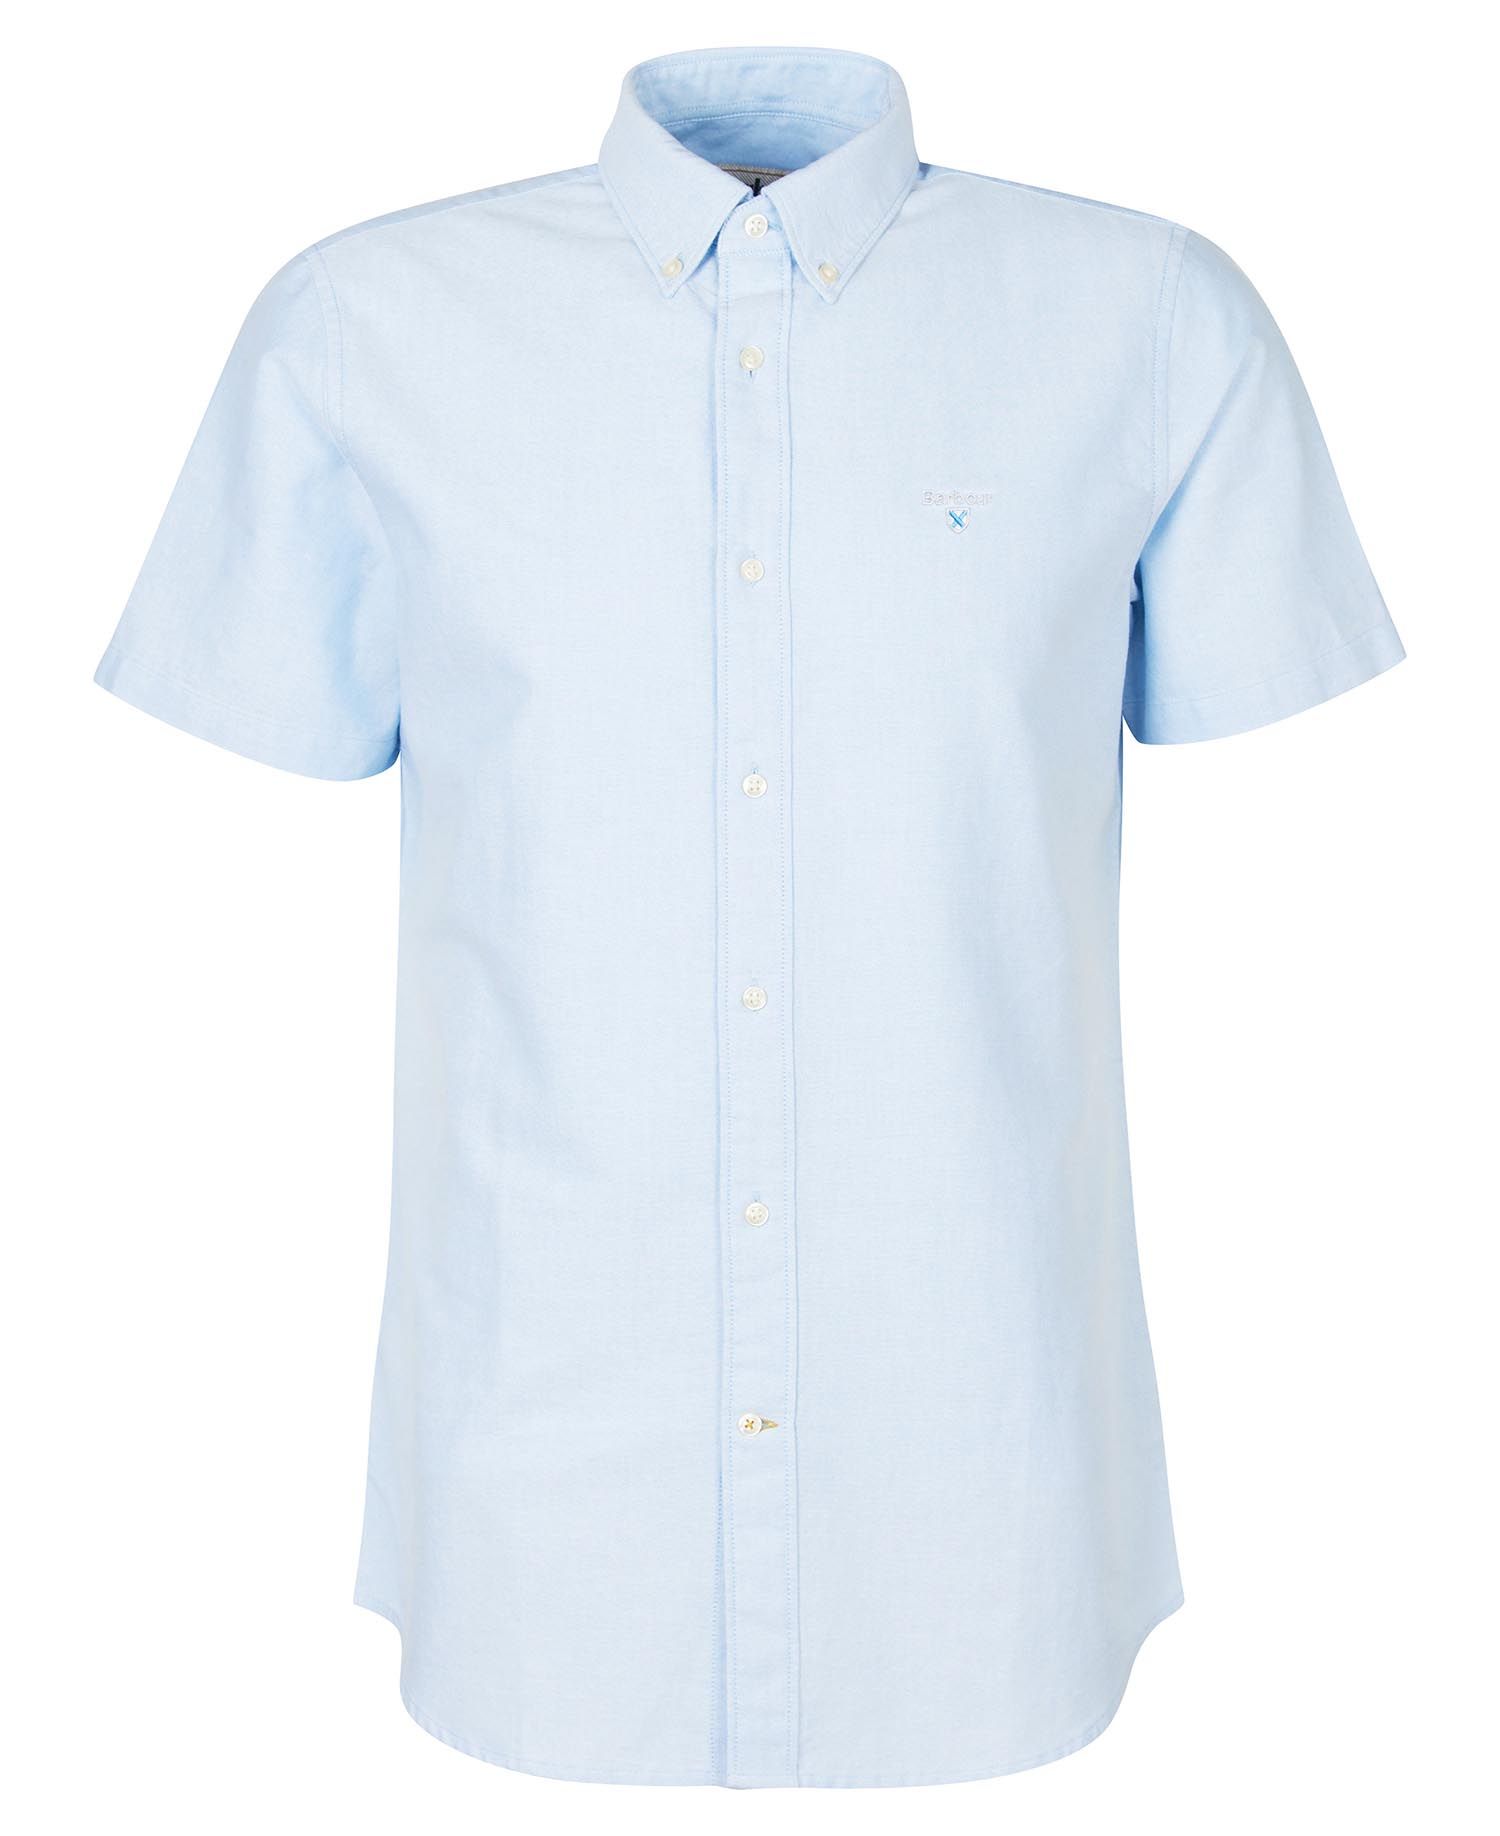 Shop the Barbour Oxford Short Sleeve Tailored Shirt today. | Barbour